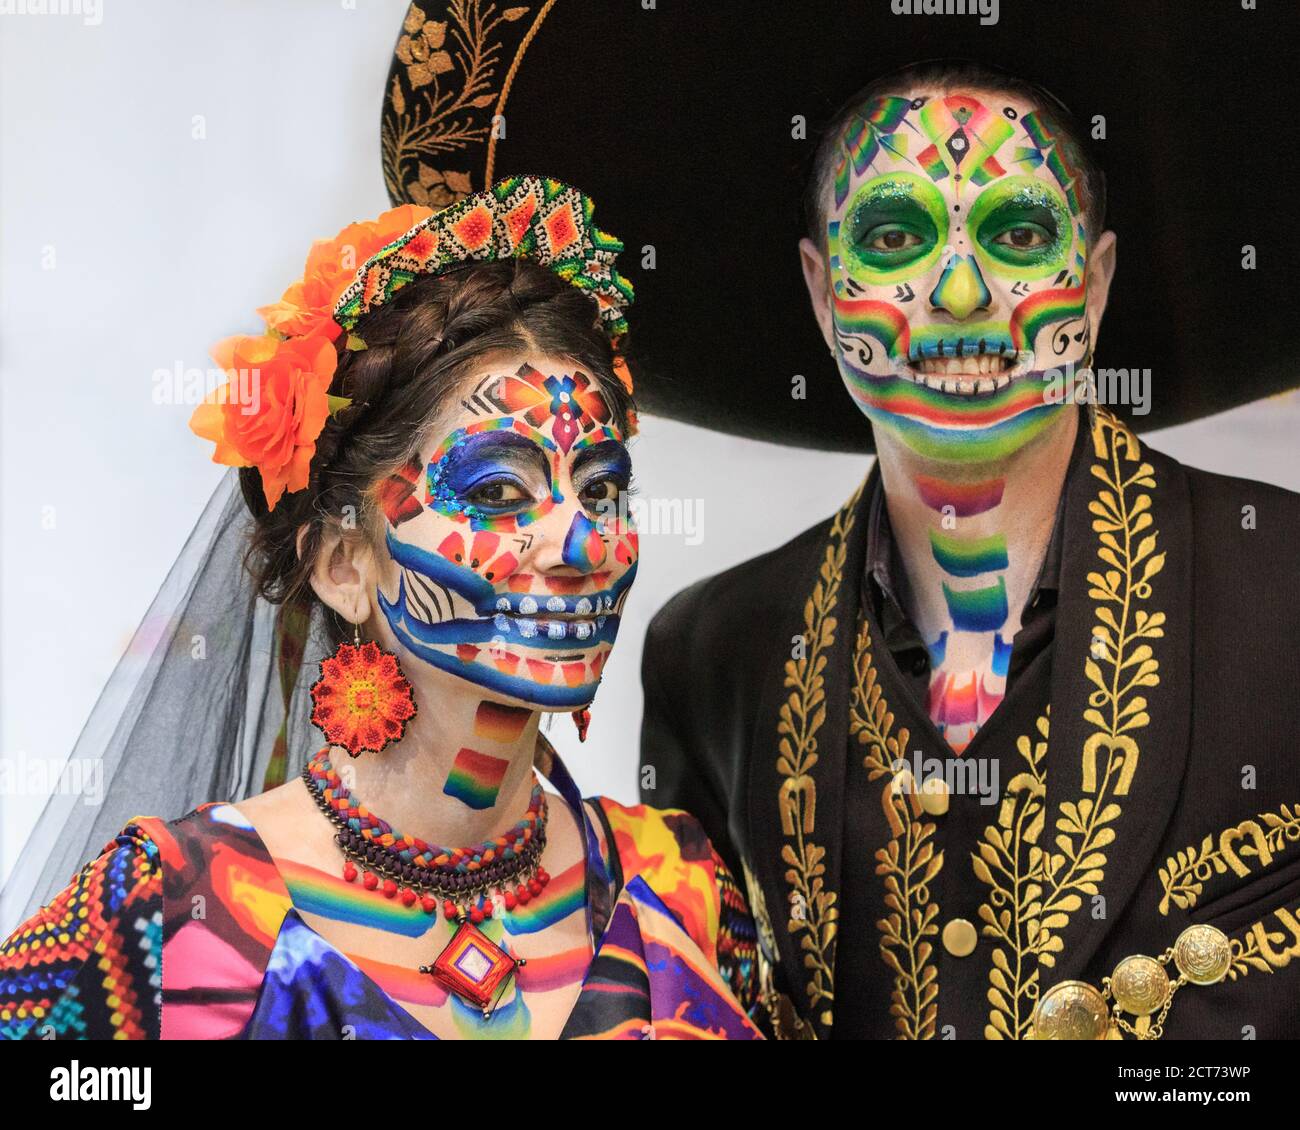 Two Mexican Day of the Dead performers in painted faces and outfits, World Travel Market (WTM) trade show, ExCel London, UK Stock Photo